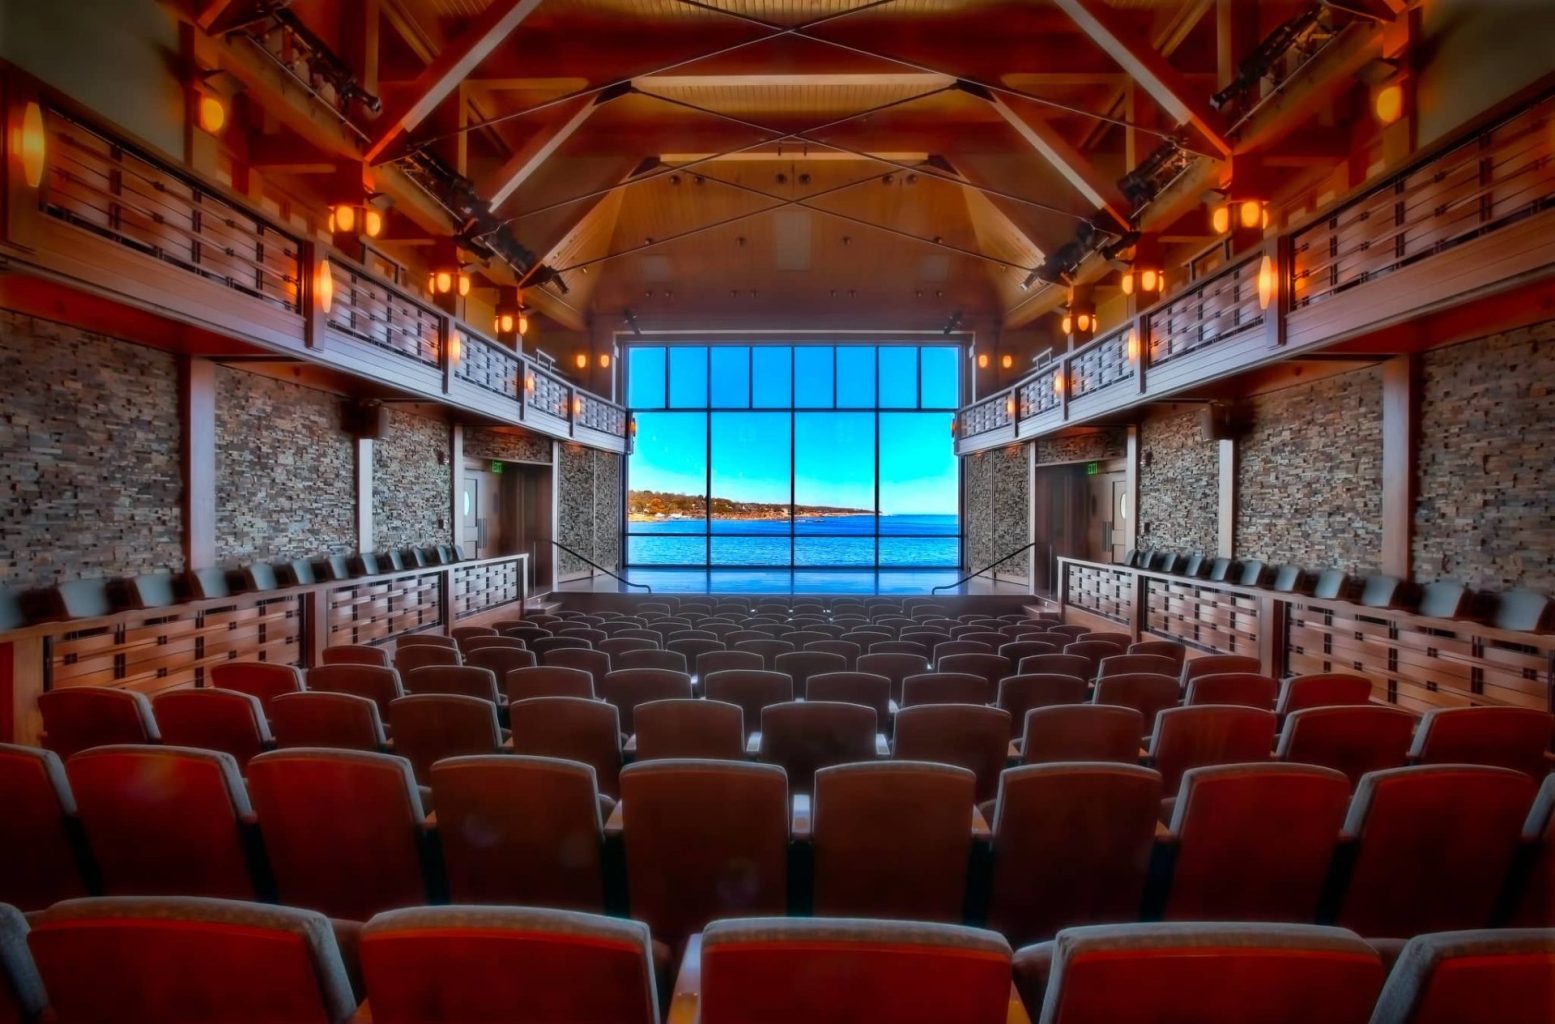 Behind all the rows of wooden seating facing the stage. Behind the stage is large window with views of the ocean